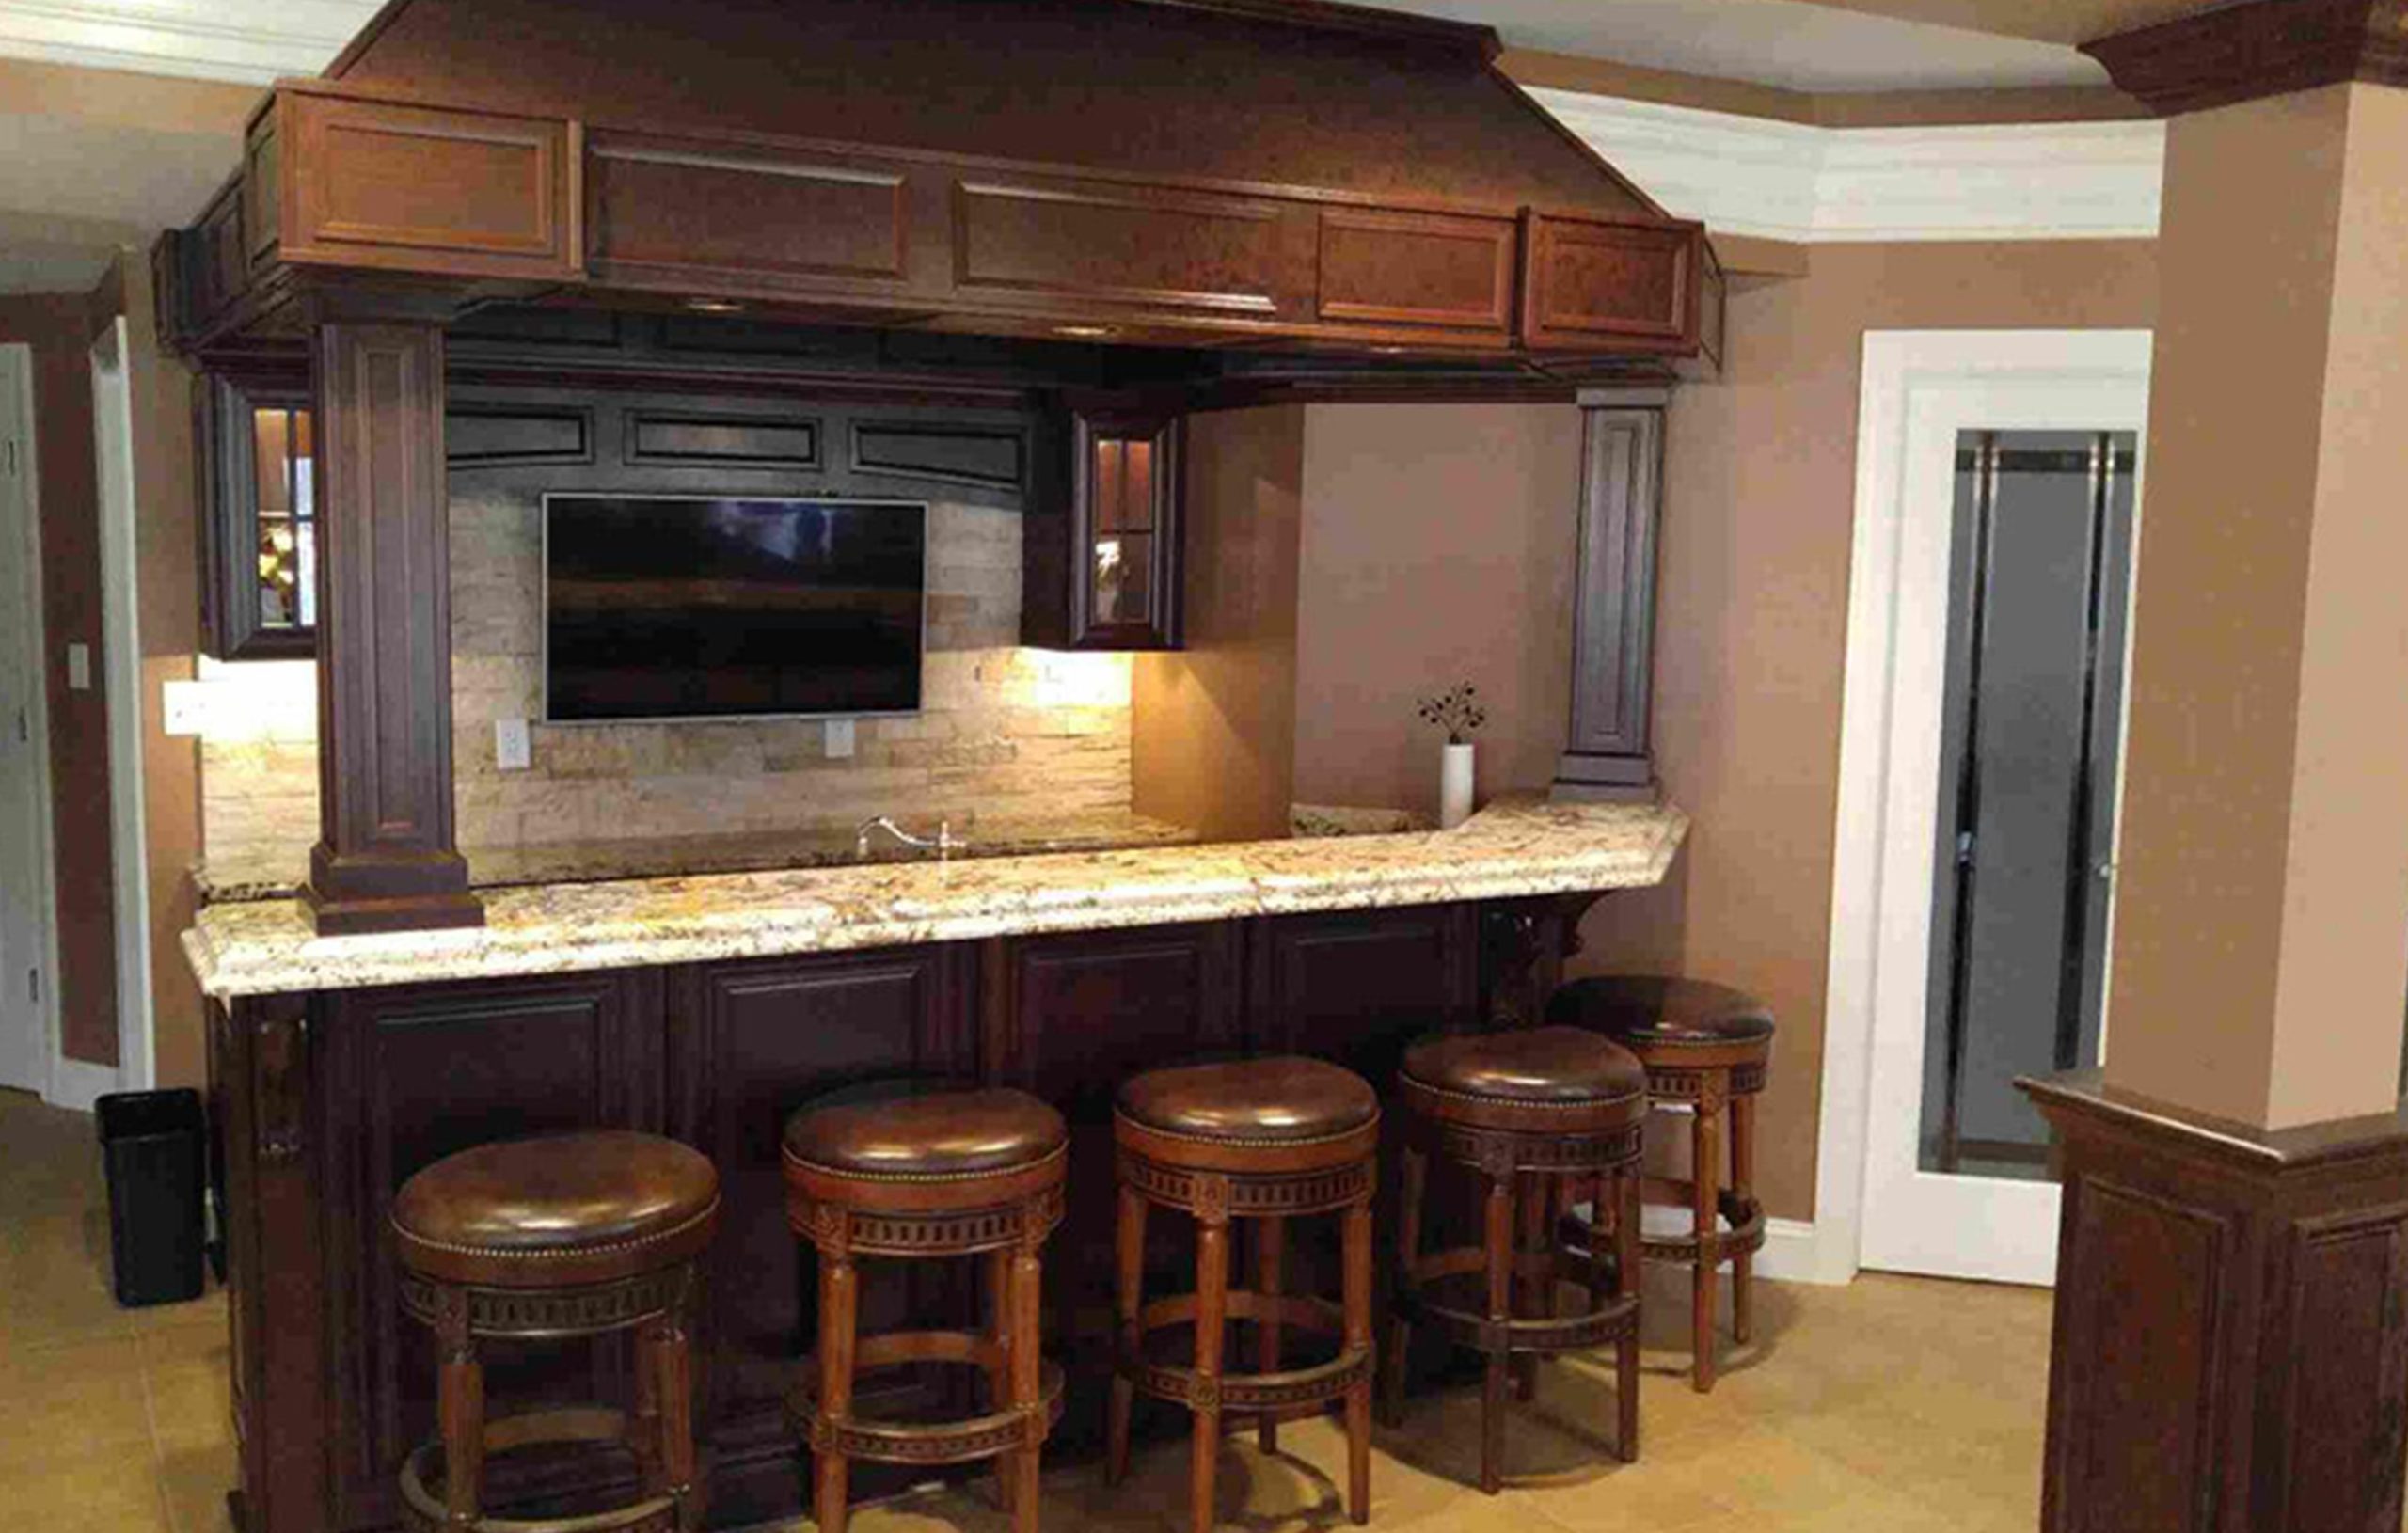 Granite top bar with wood finish and an overhang above it